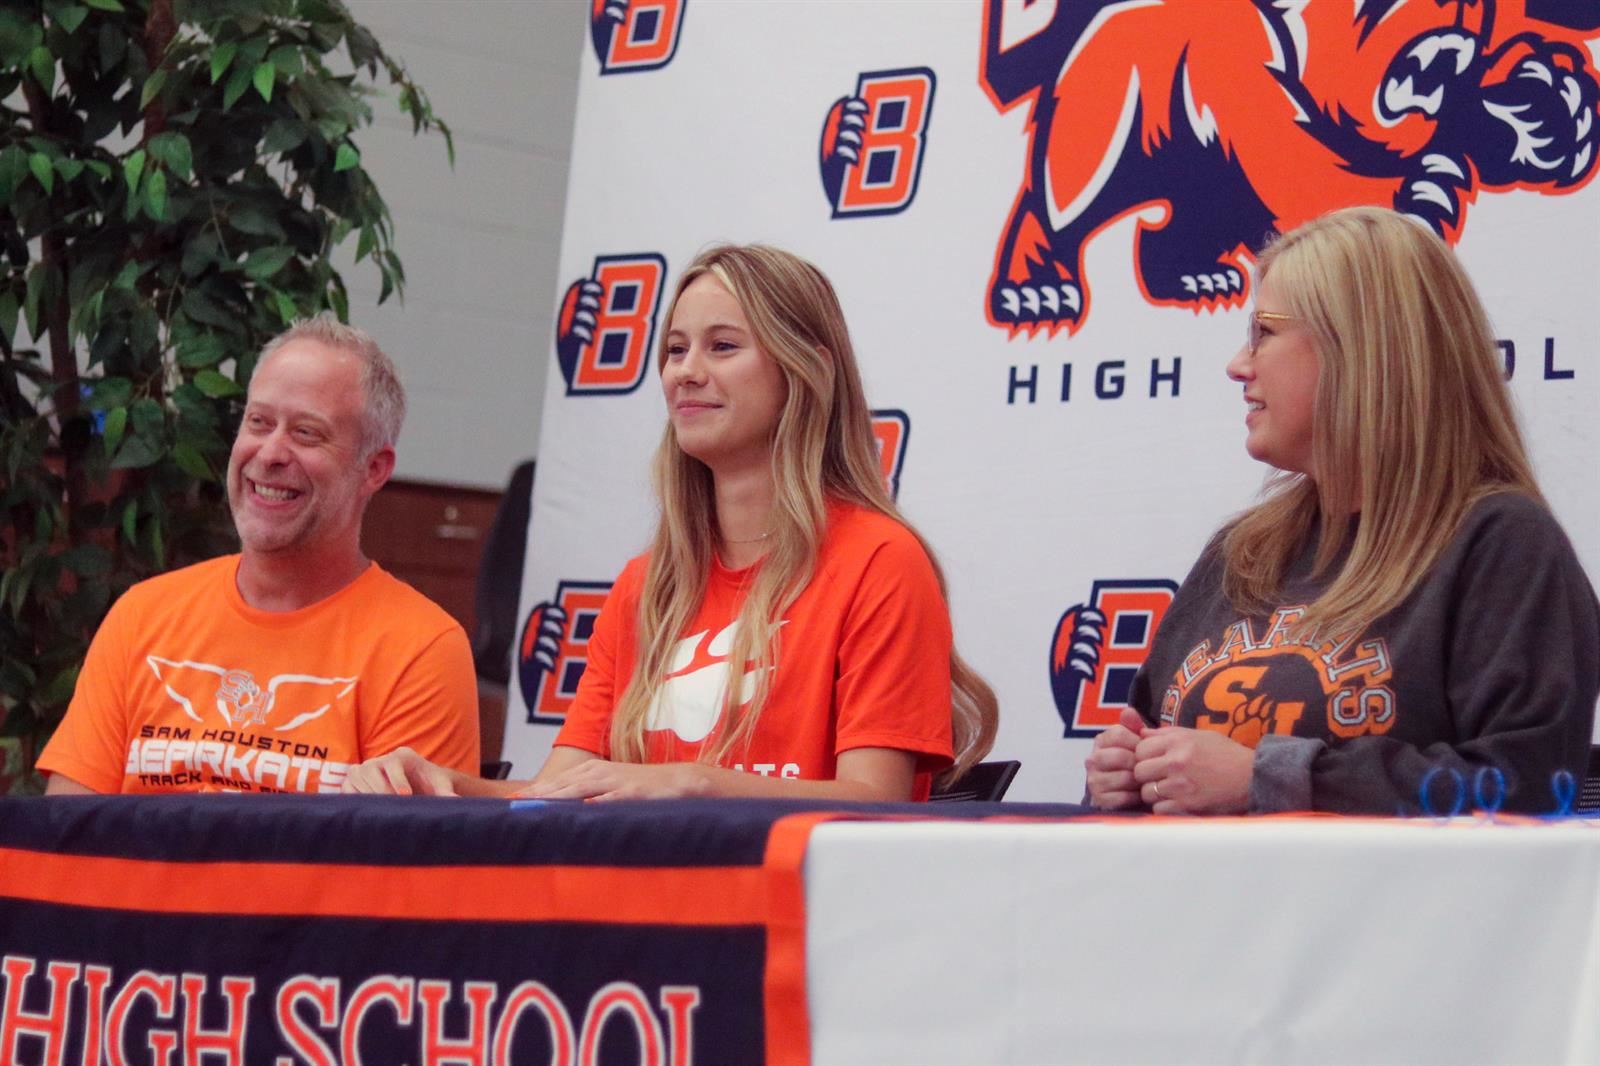 Bridgeland senior Madeleine Wilson, center, signed her letter of intent to run cross country and track at Sam Houston State.